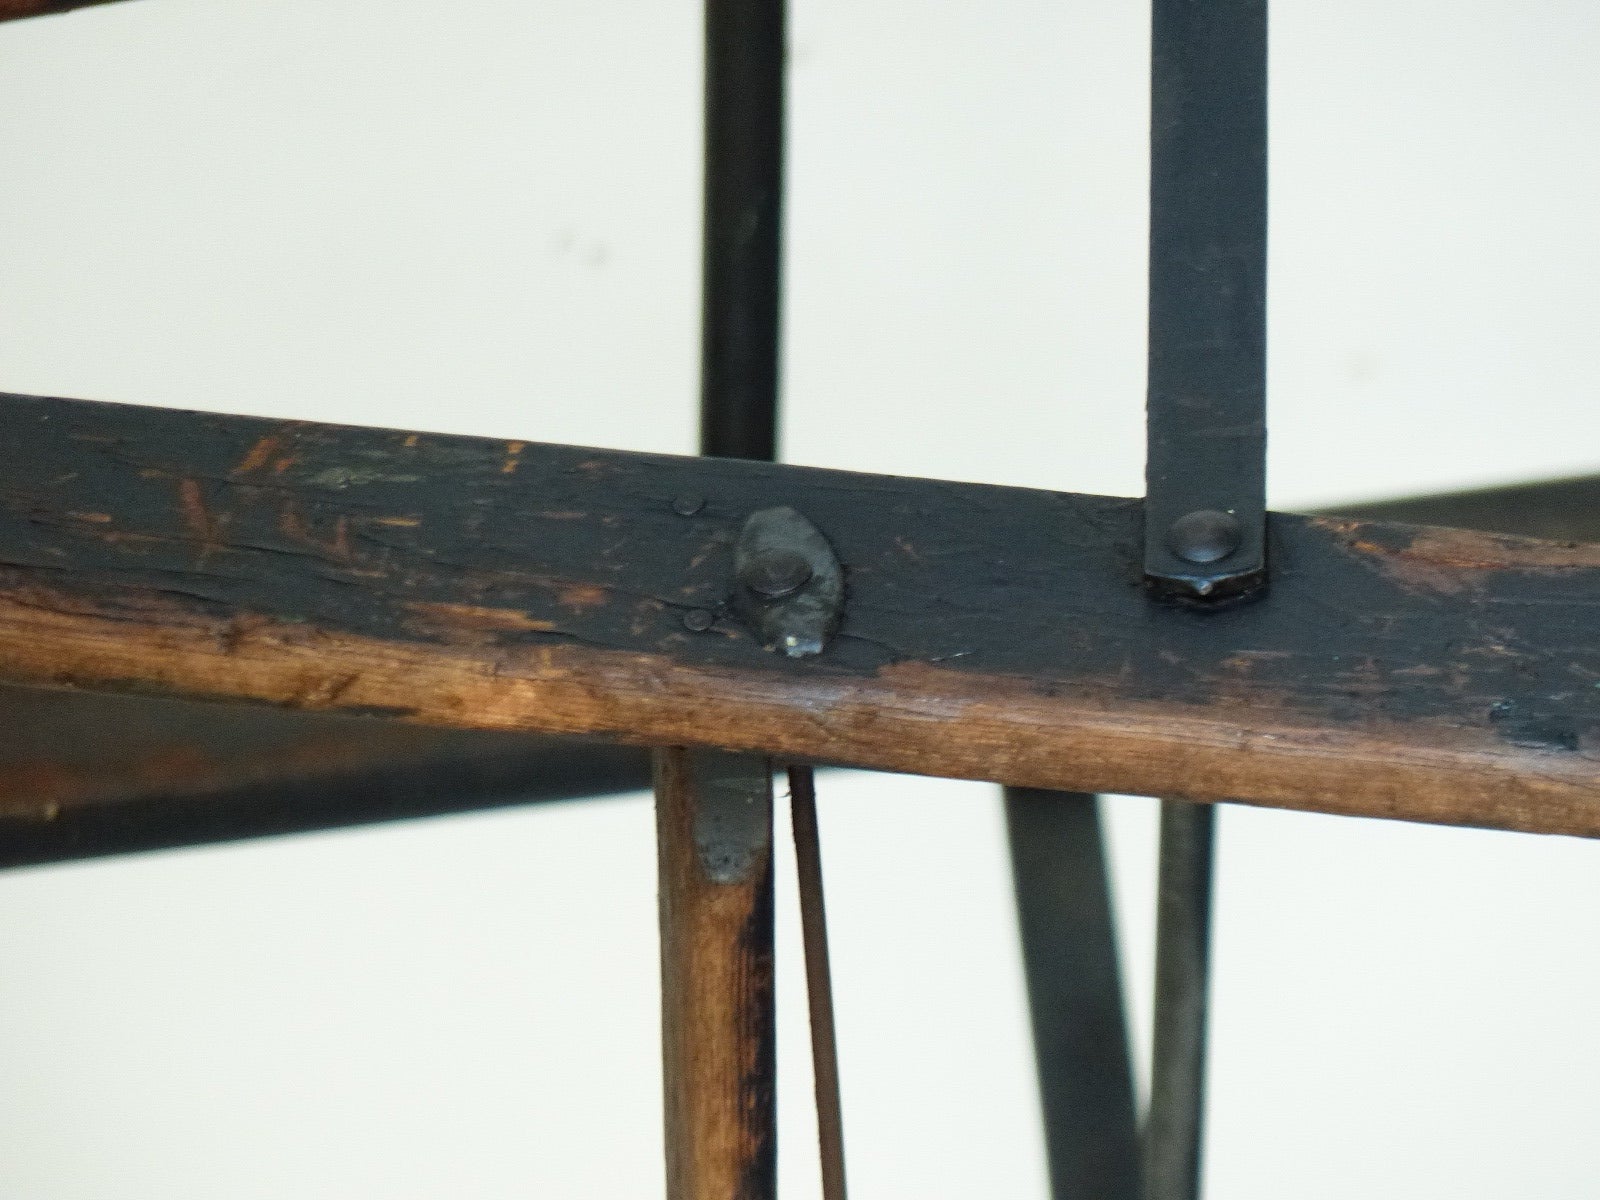 Late 19th century store ladder. Great patina in untouched condition with nice details